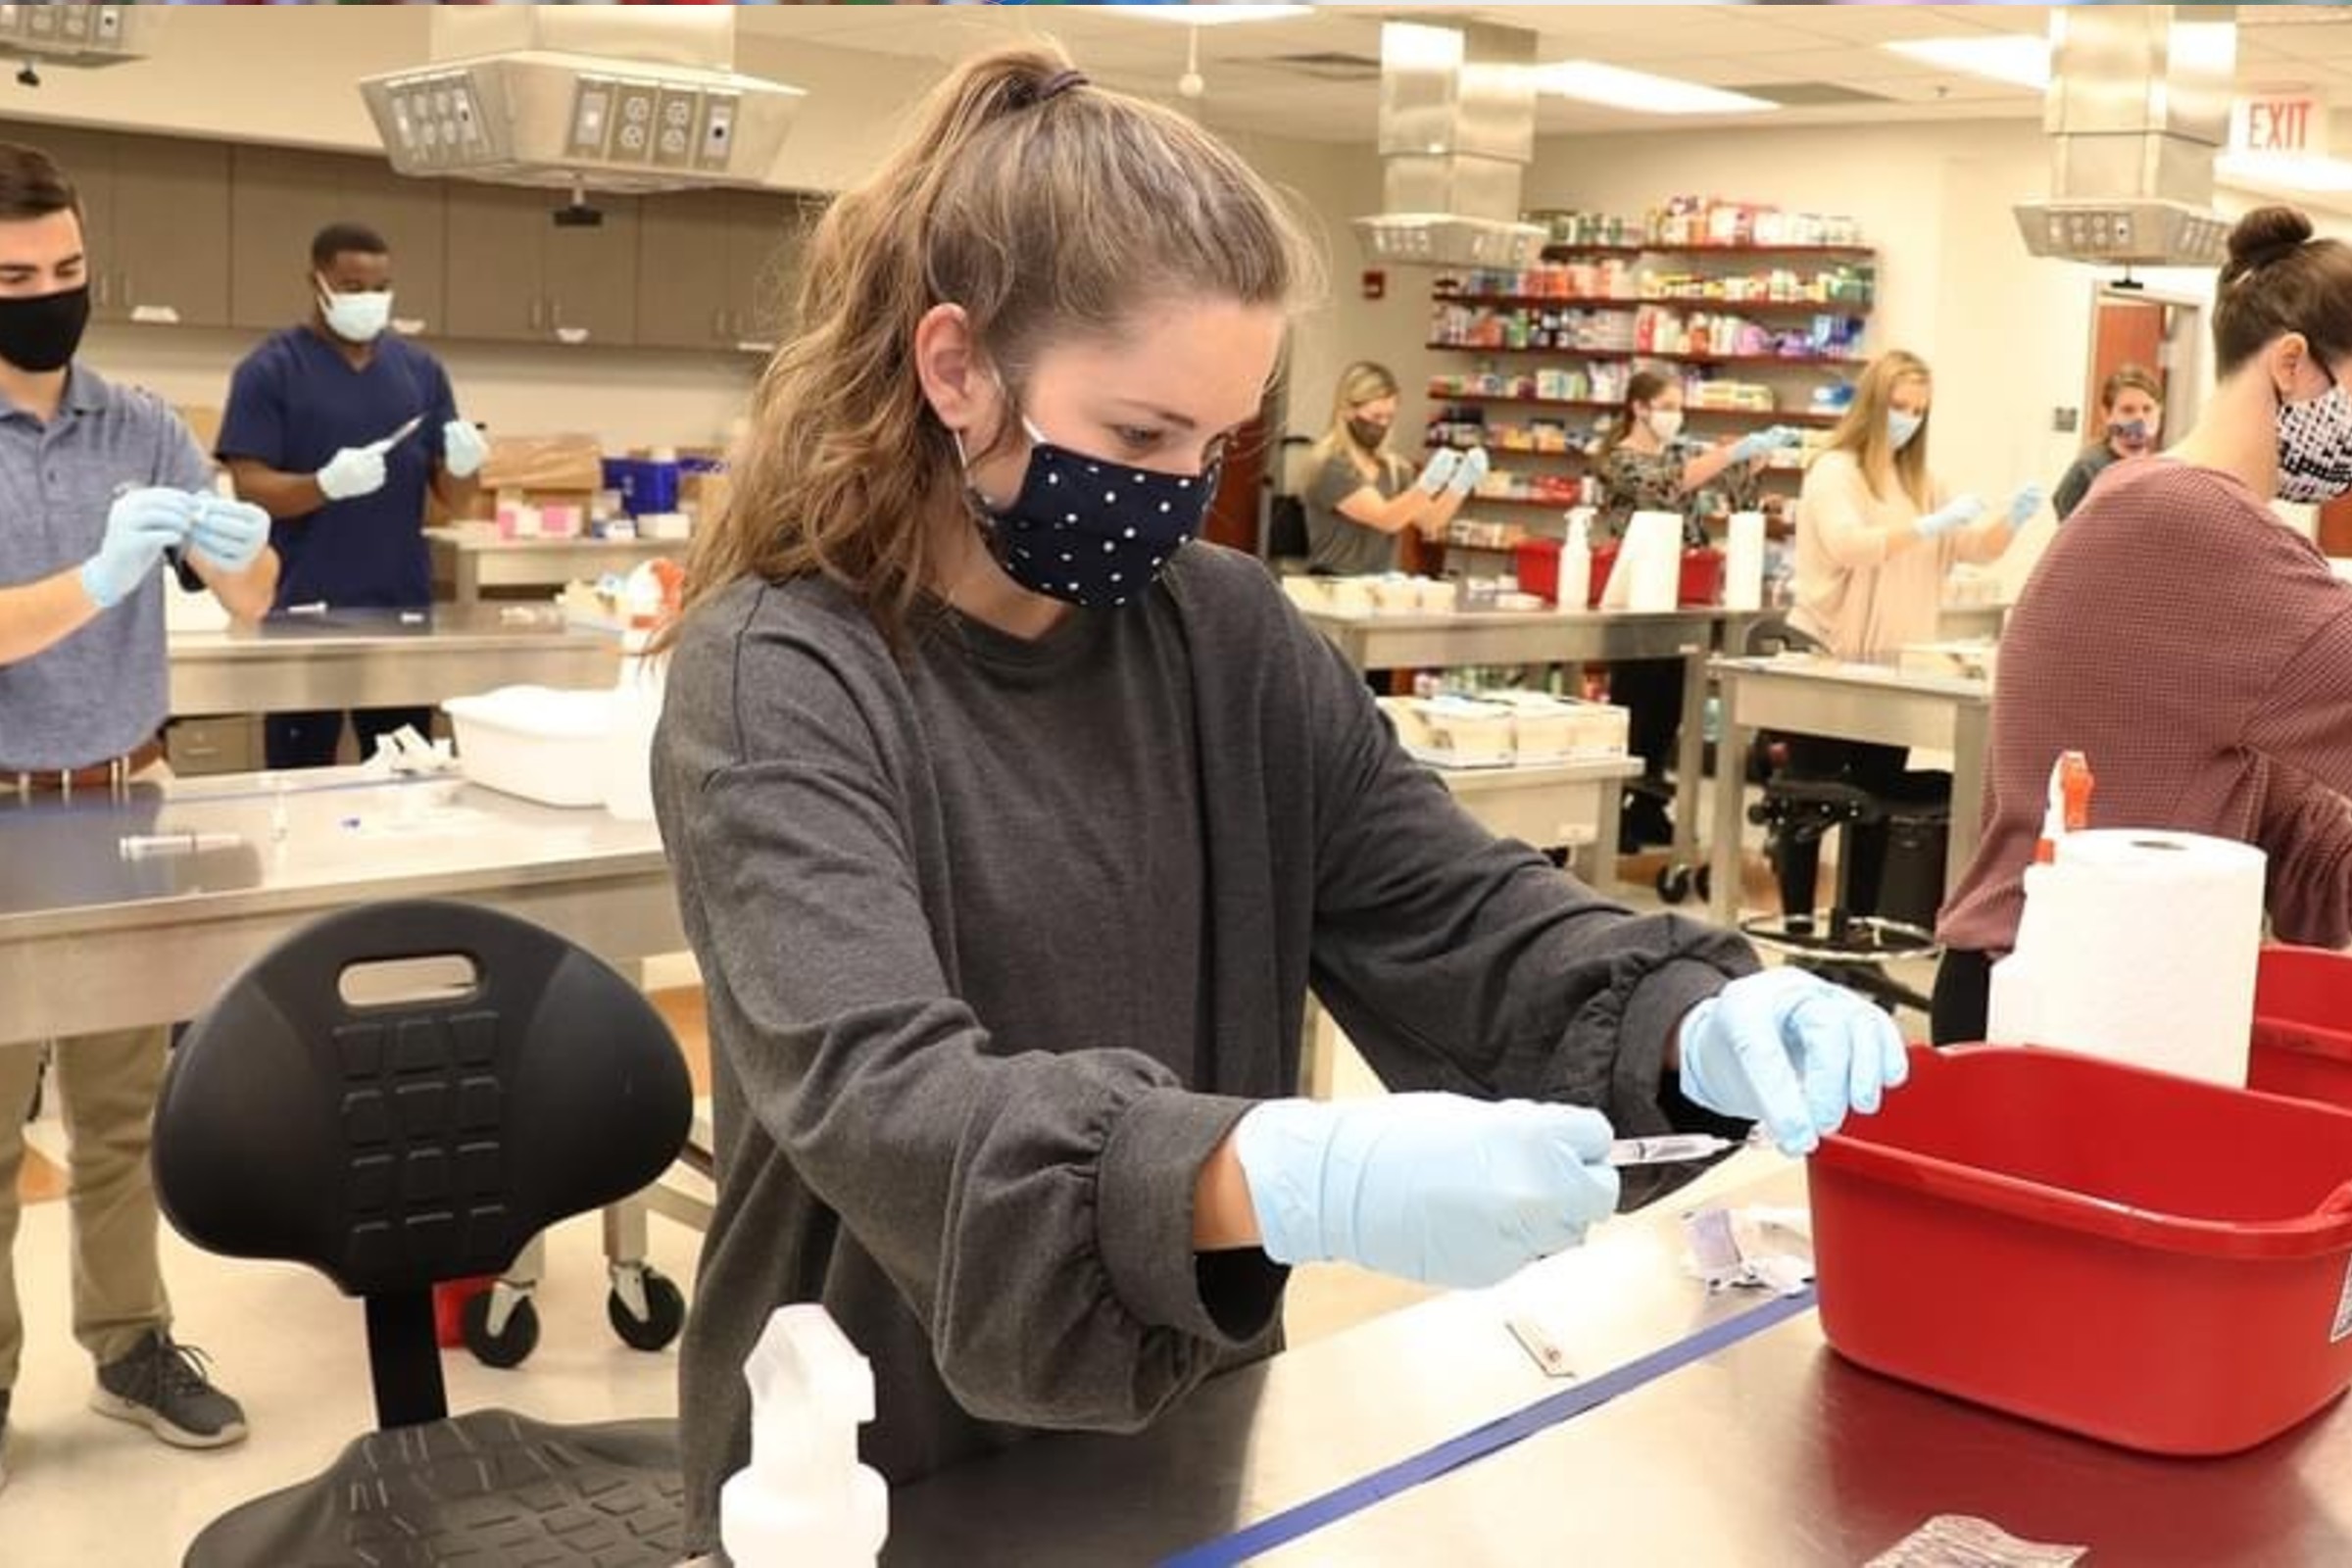 The Harrison School of Pharmacy is one of 12 colleges and schools at Auburn University, offering more than 150 majors to students.